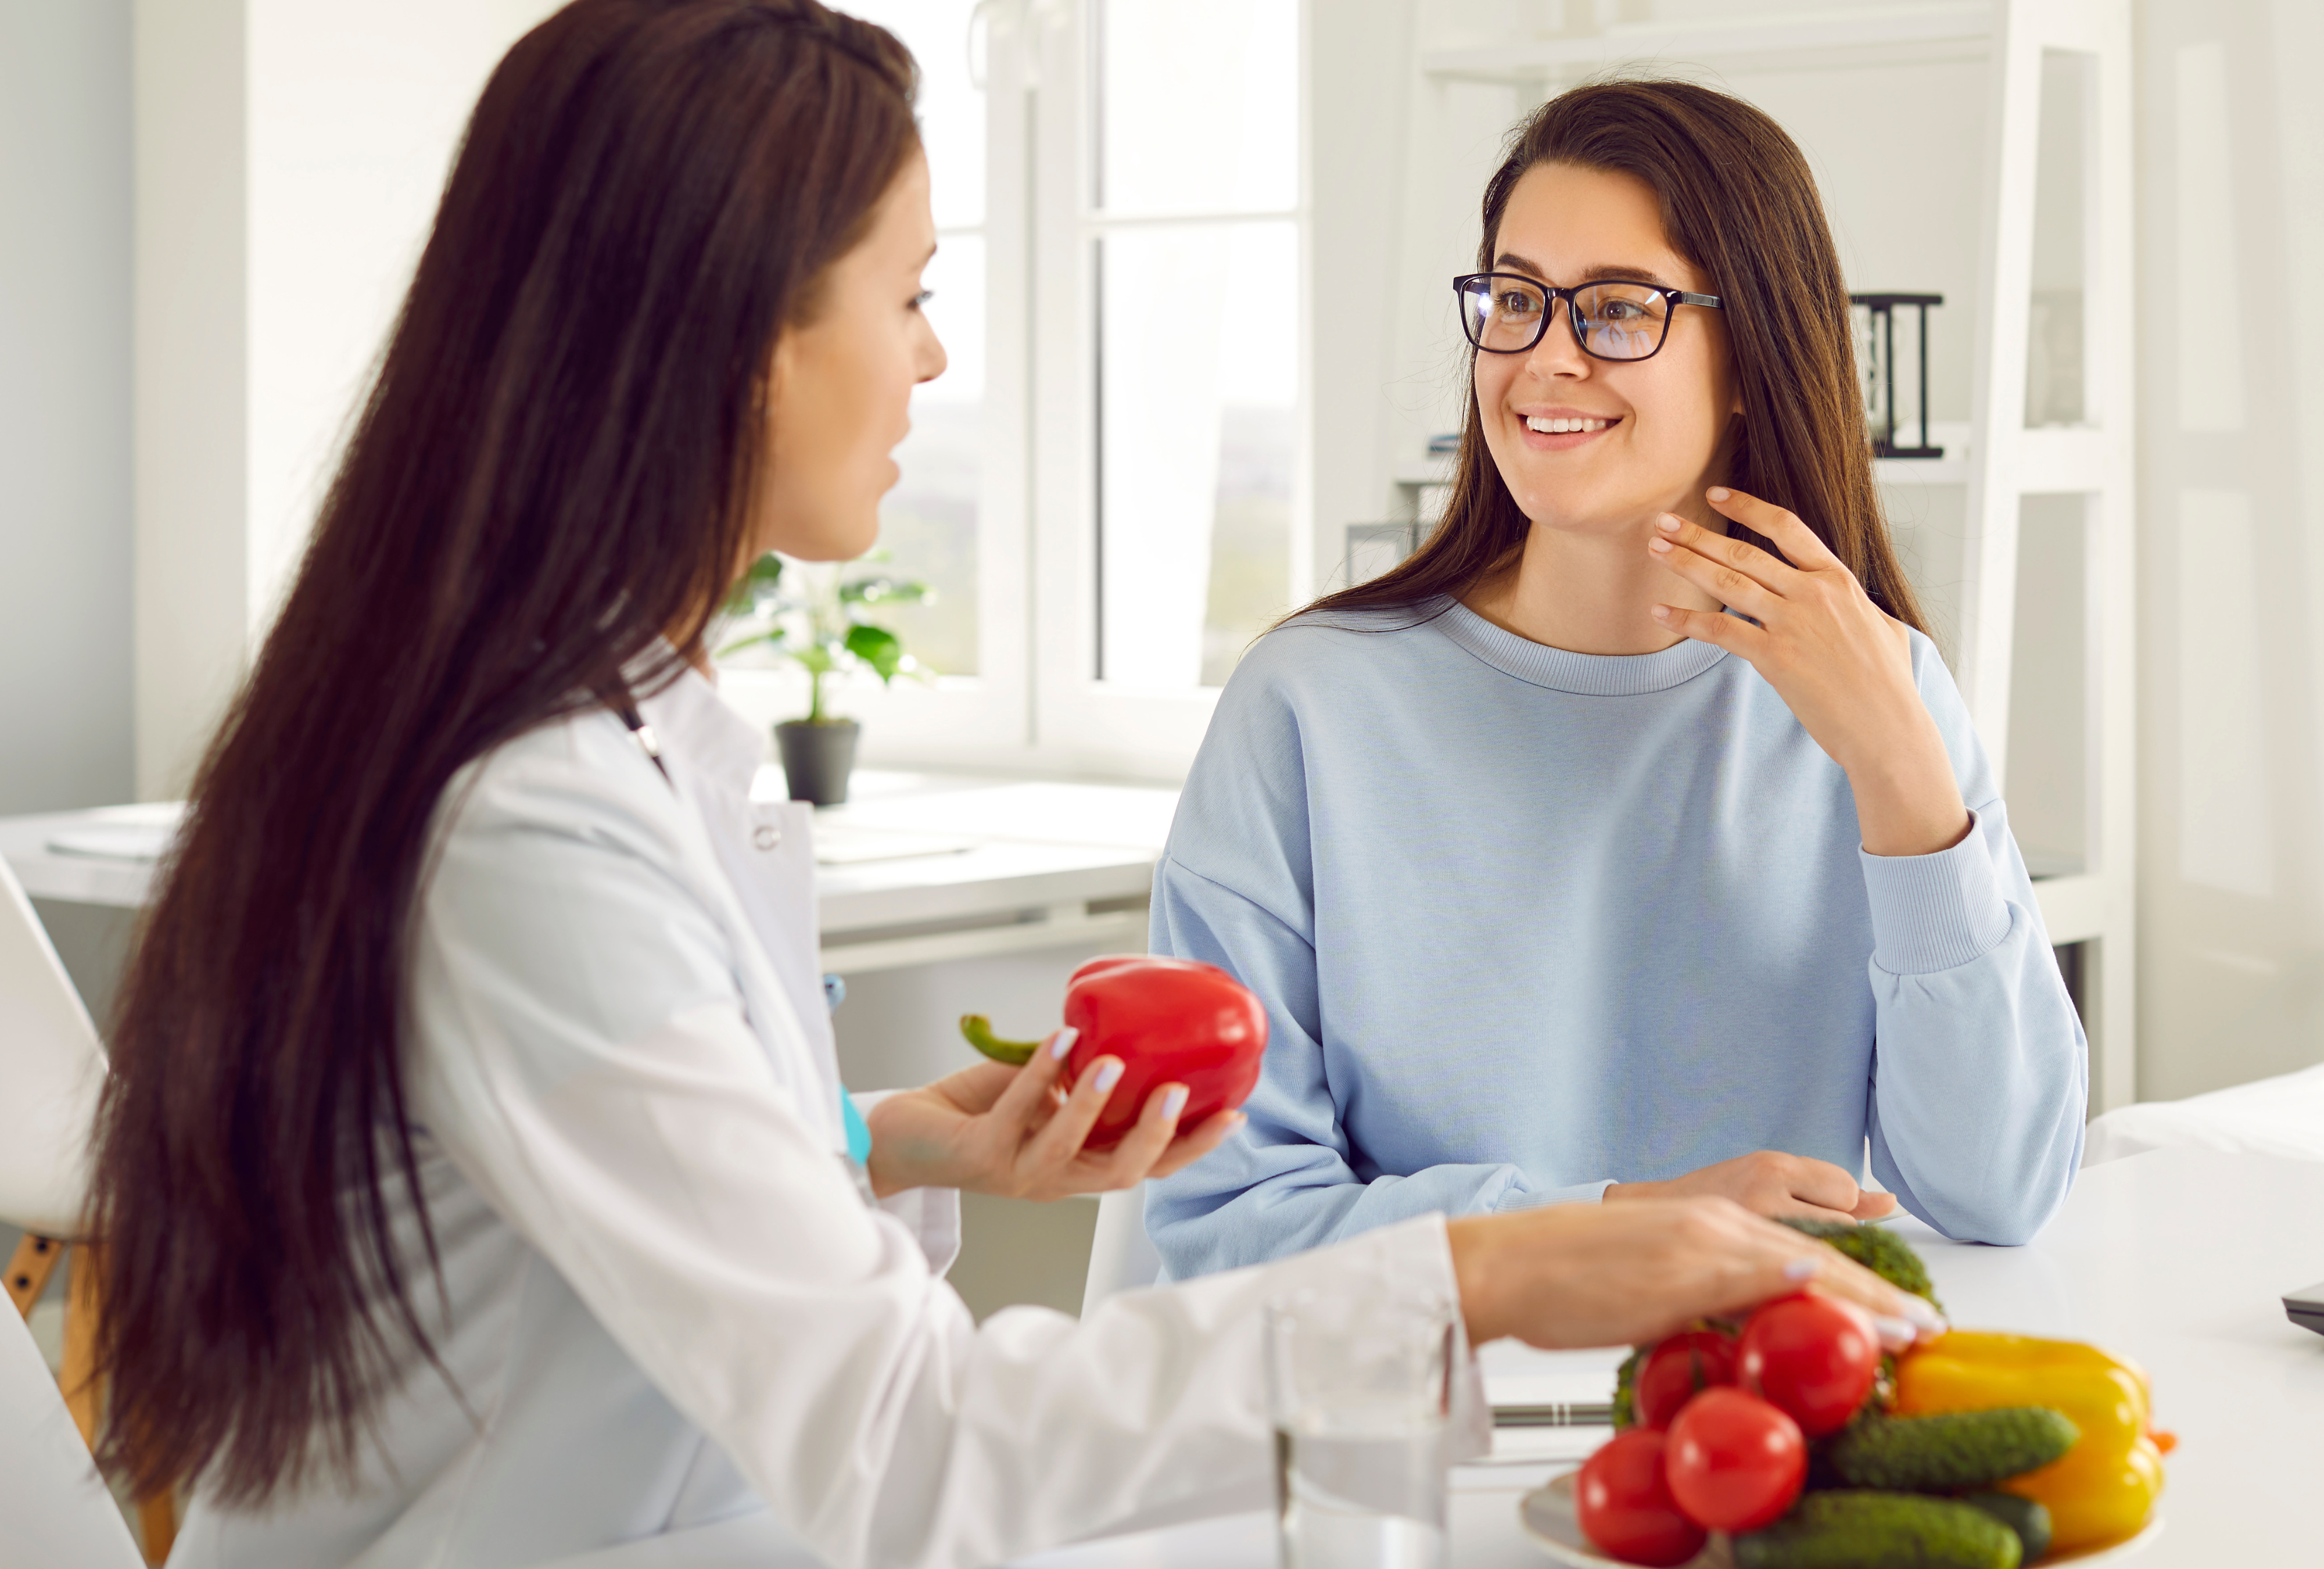 A registered dietitian consults with a client